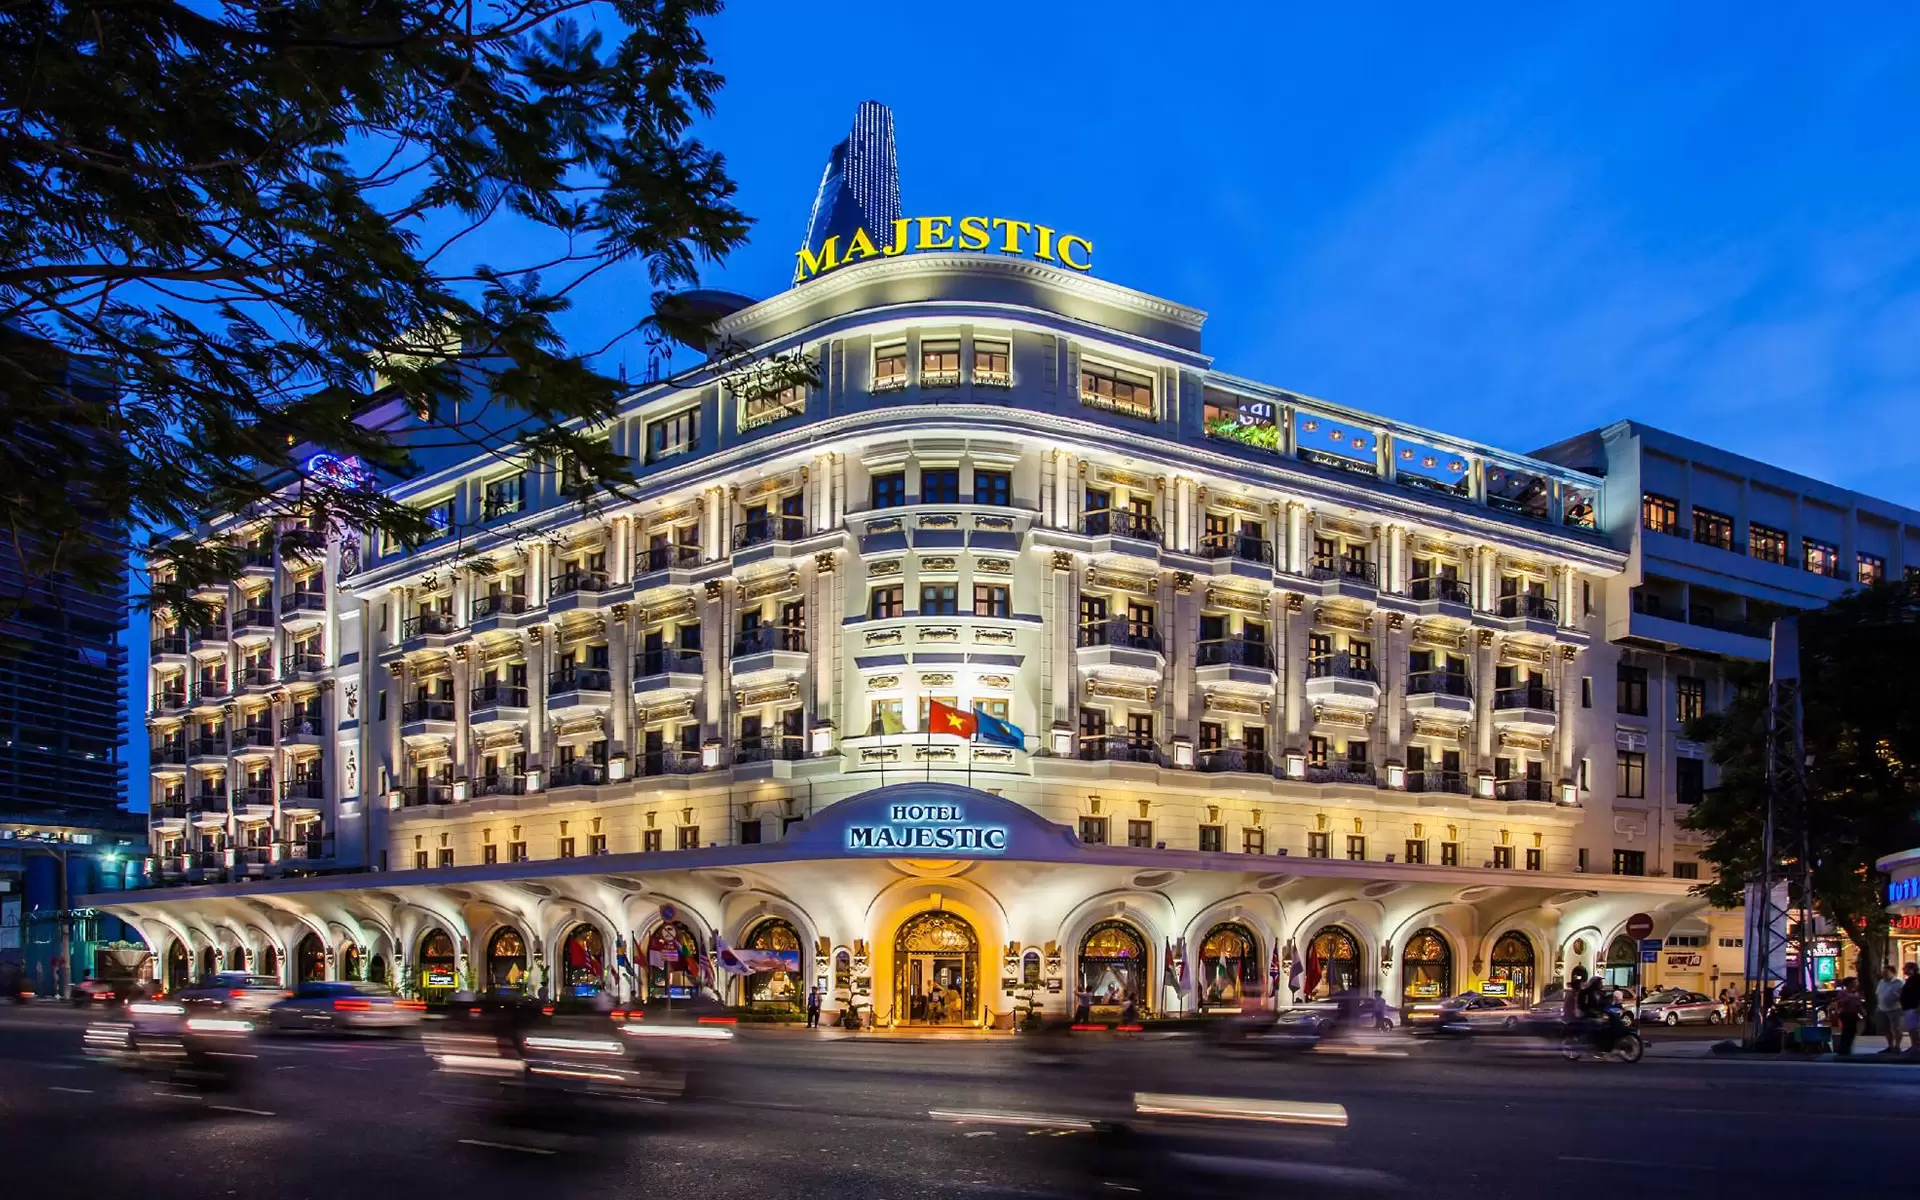 Hotel Majestic Saigon - one of the oldest 5 star hotels in Ho Chi Minh City